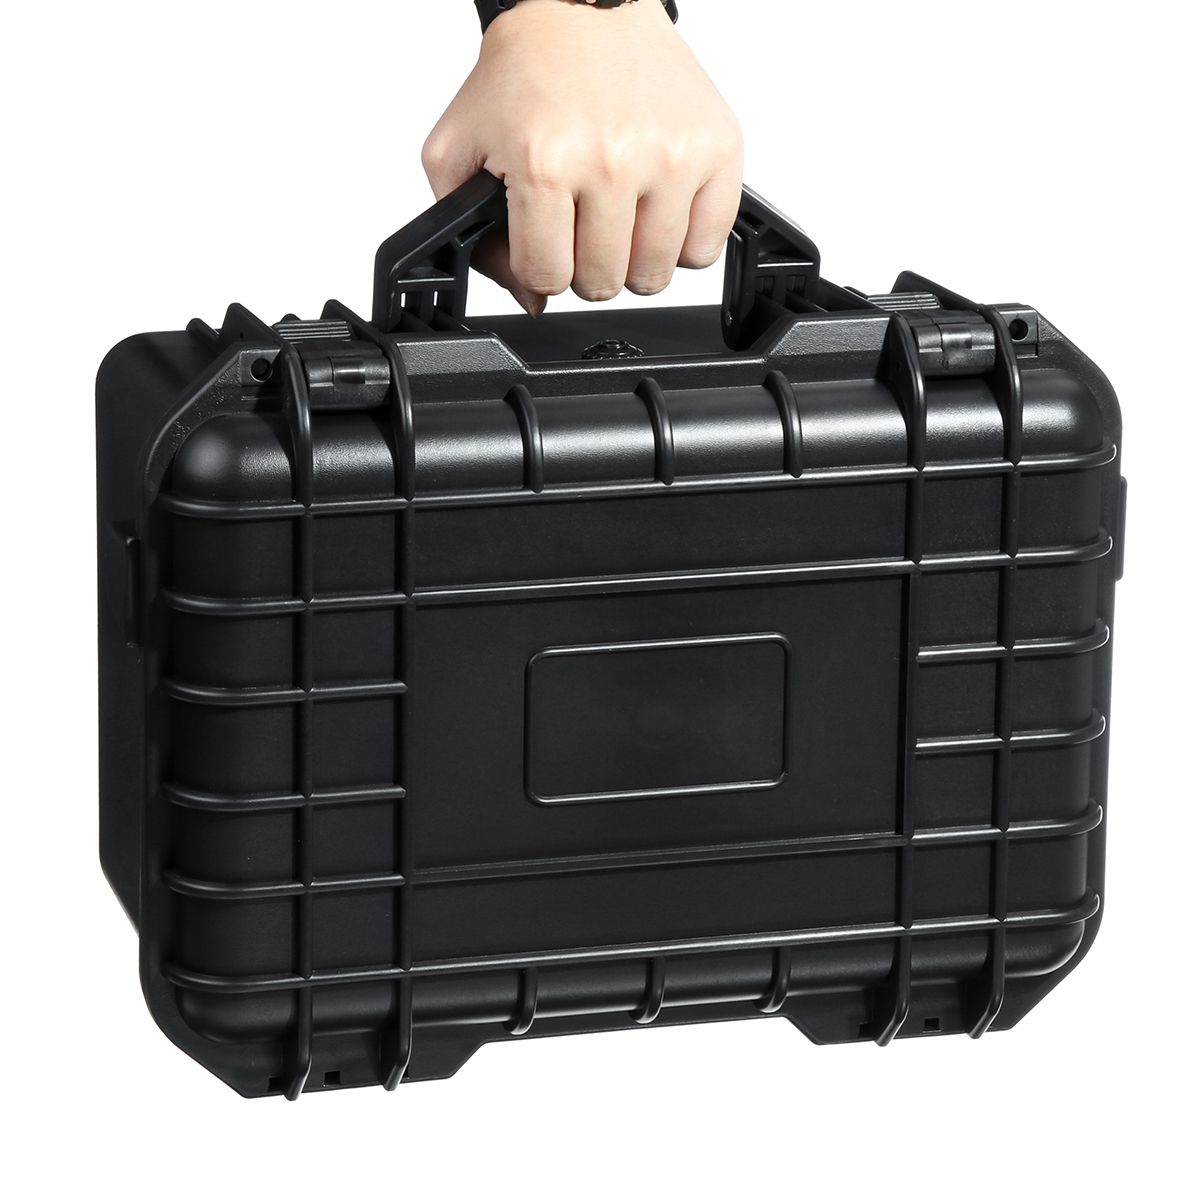 ABS-Aluminum-Alloy-Tool-Box-Instrument-Storage-Case-Outdoor-Tactical-Safety-Box-1545473-1